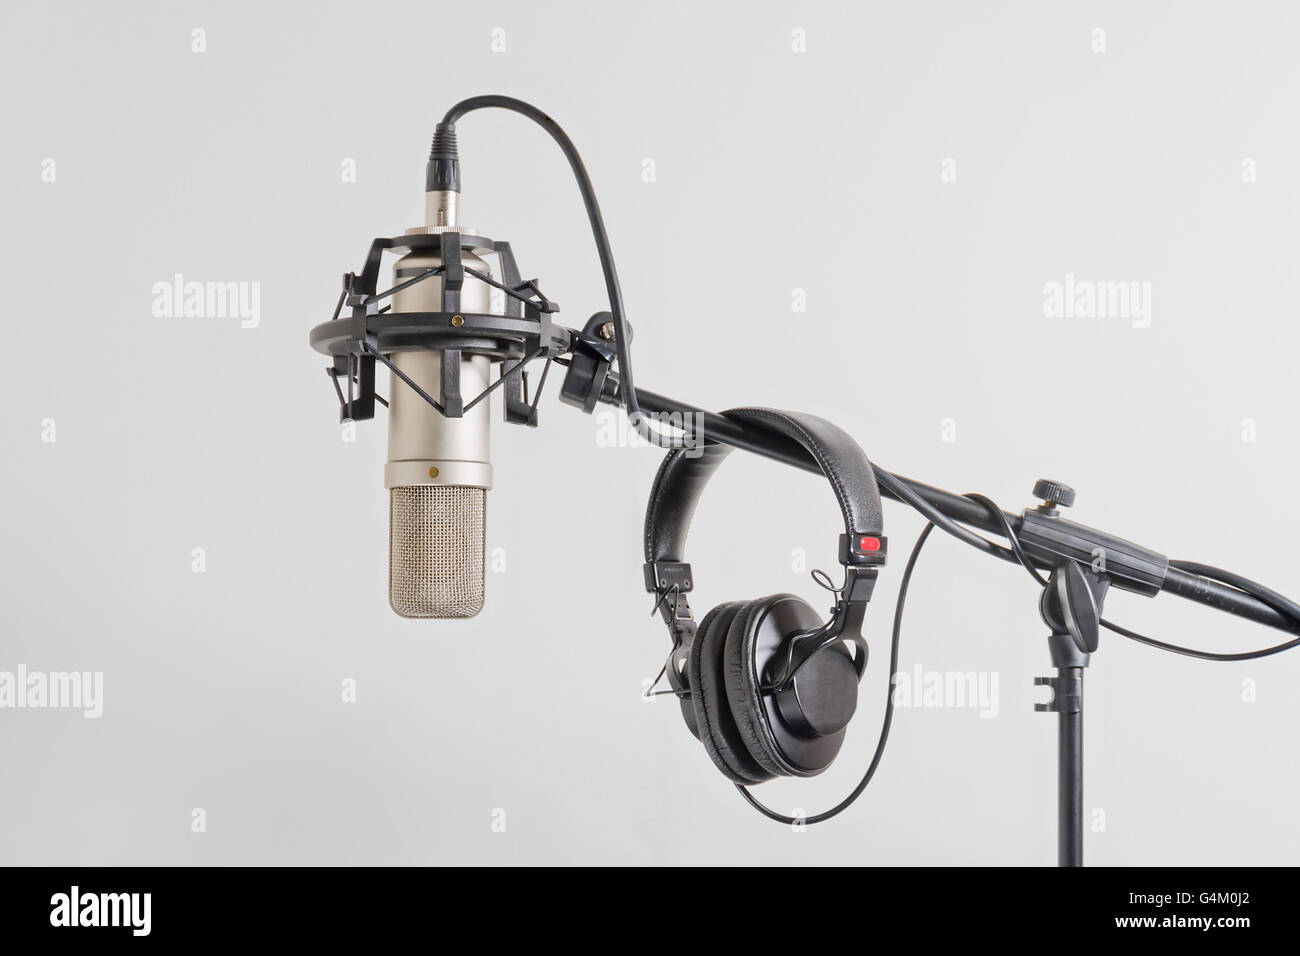 Professional condenser microphone with headphones on a stand. White background. Stock Photo